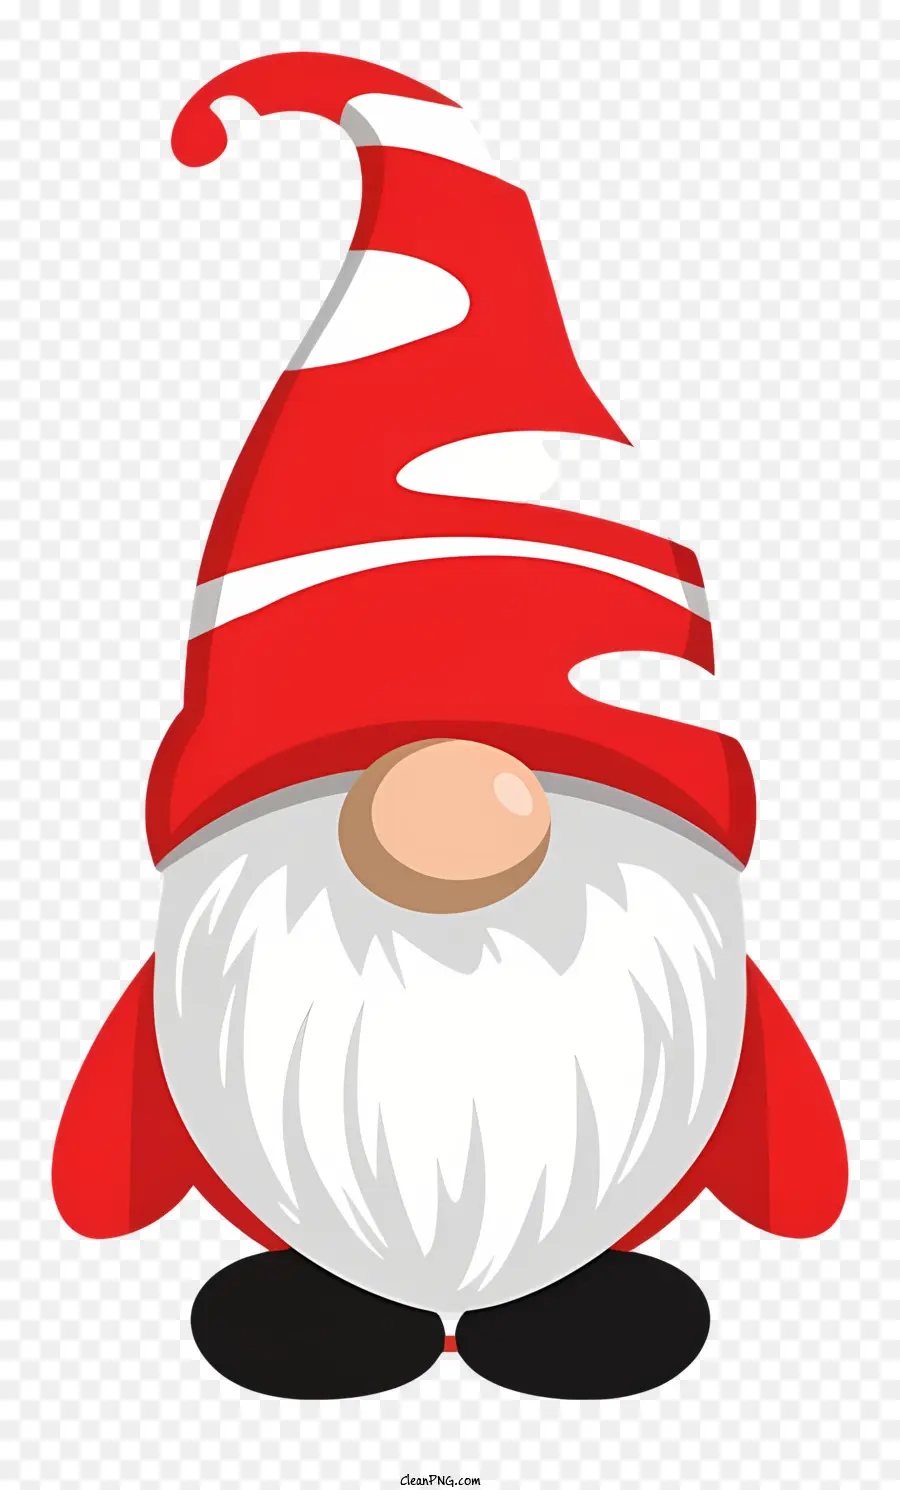 gnome red and white striped hat white beard round body small arms and legs